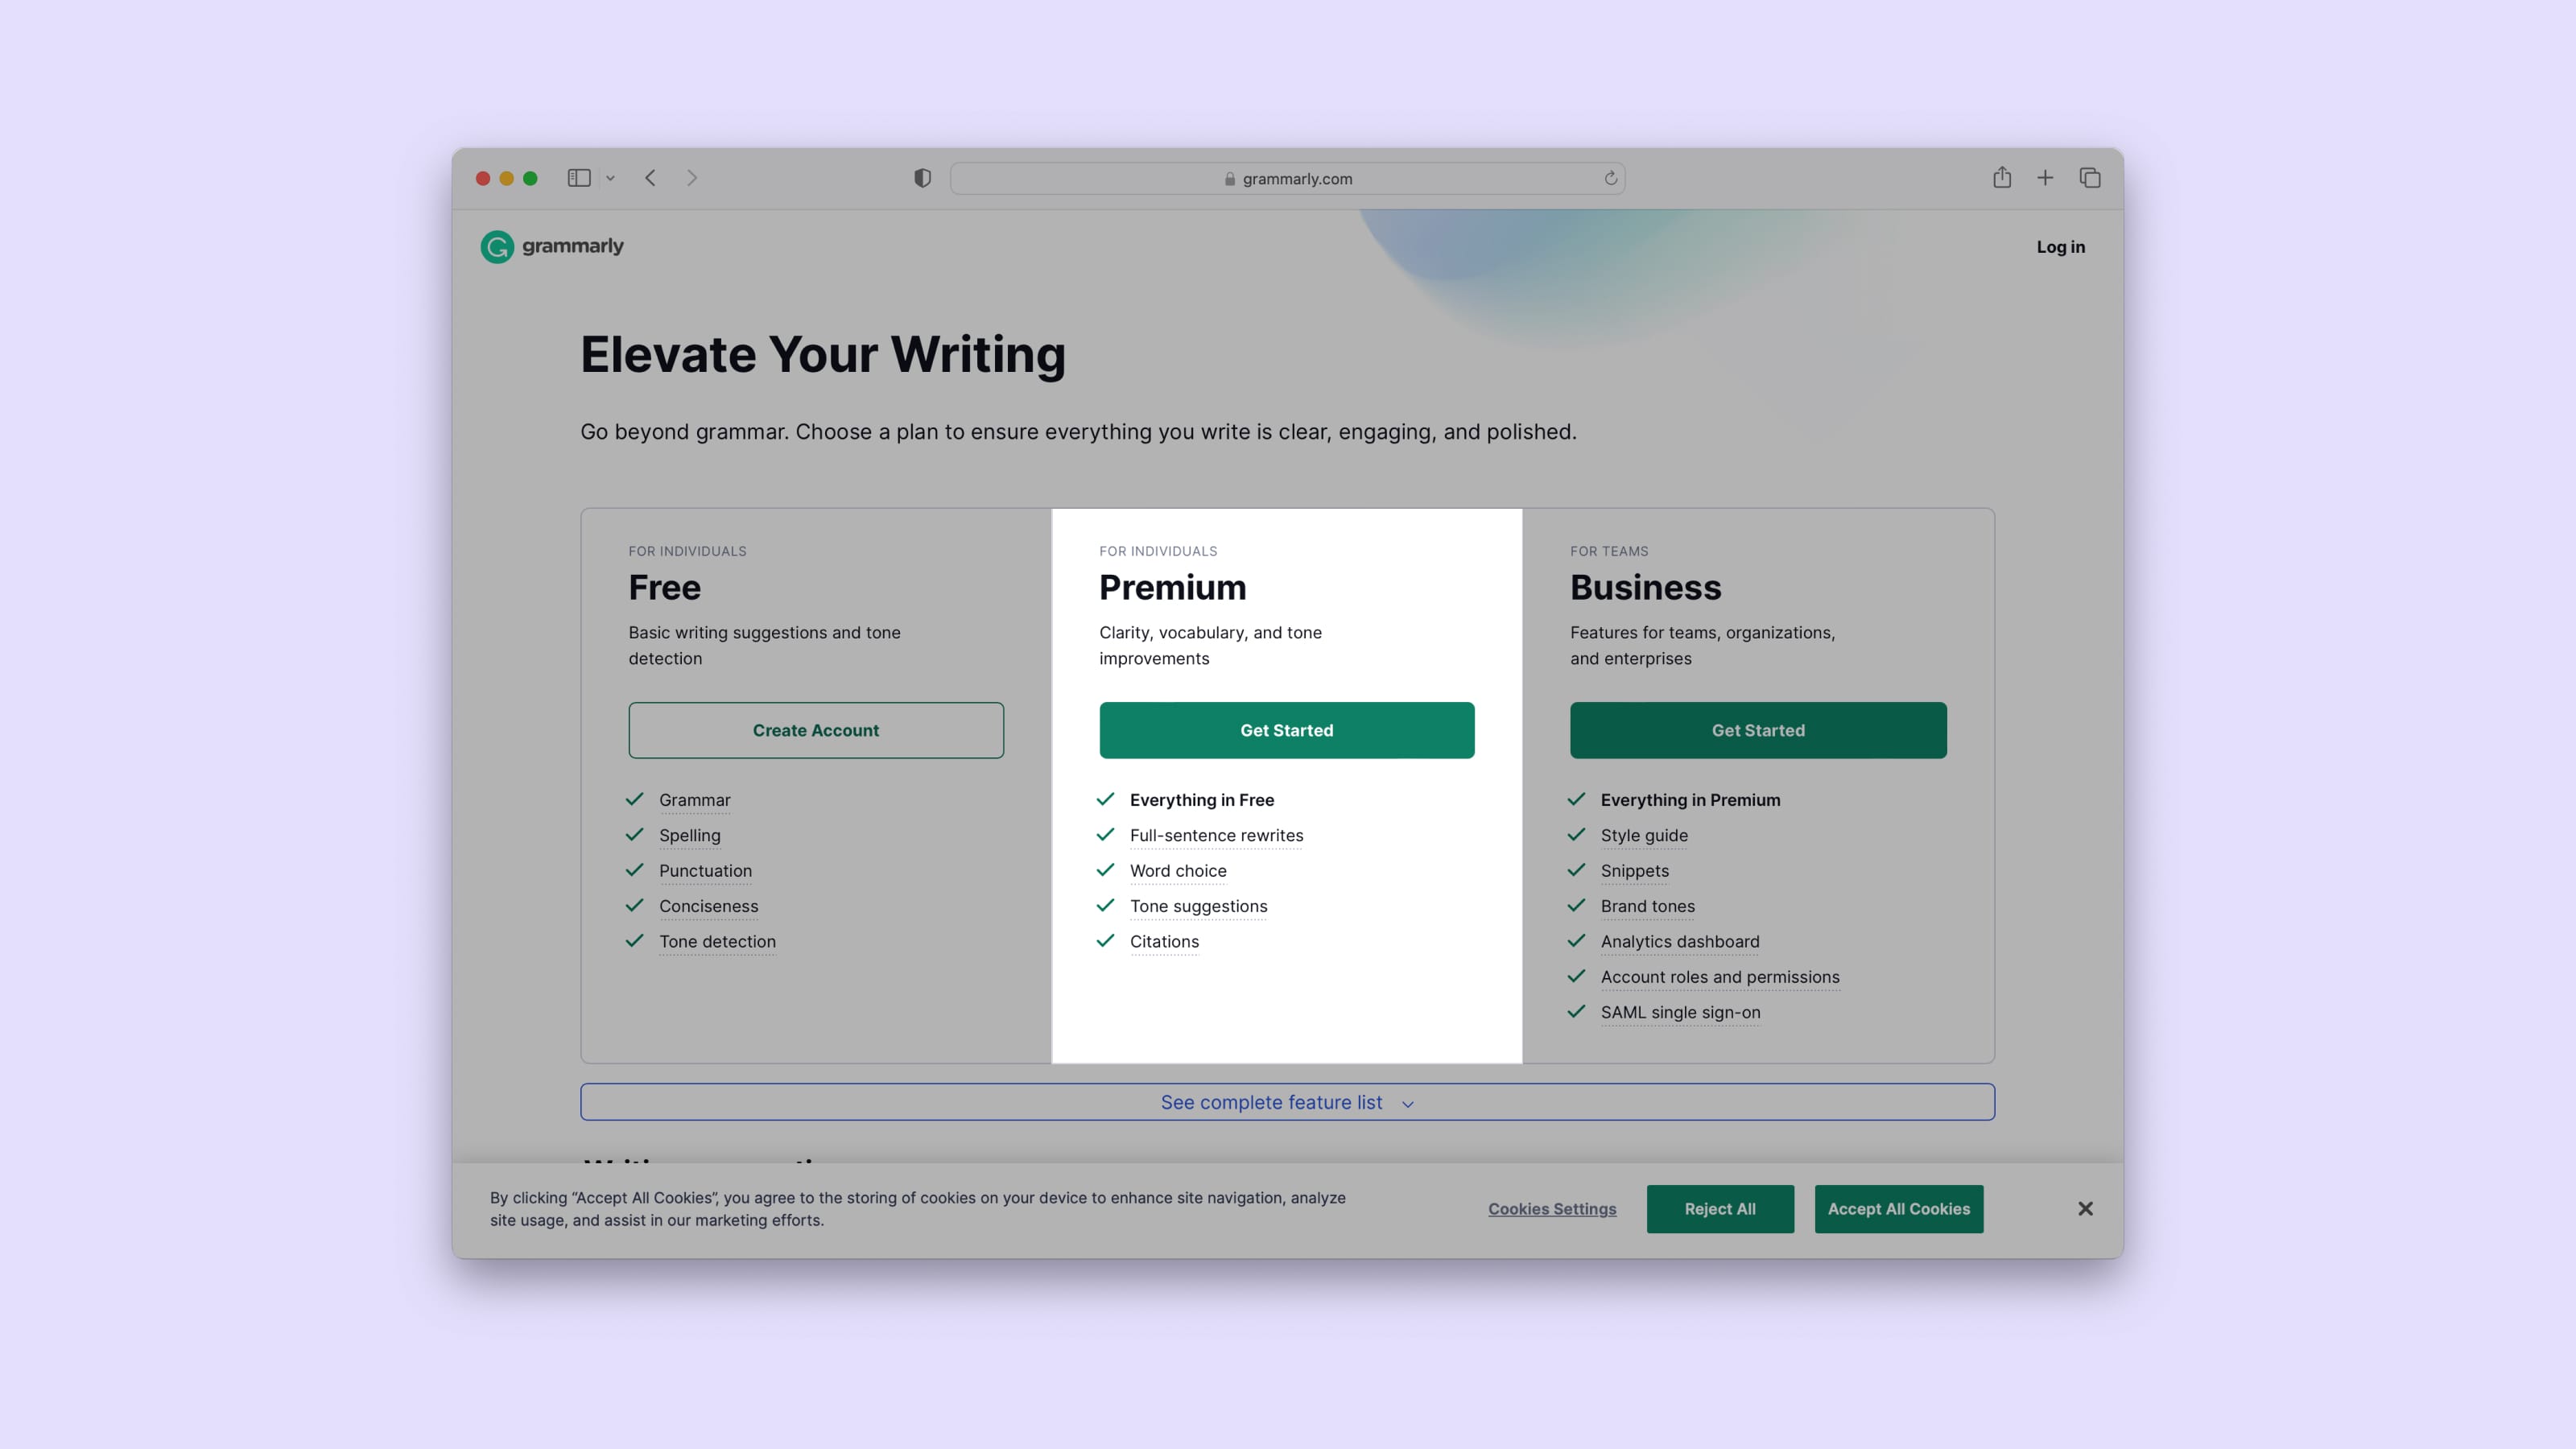 A screenshot of Grammarly's pricing page